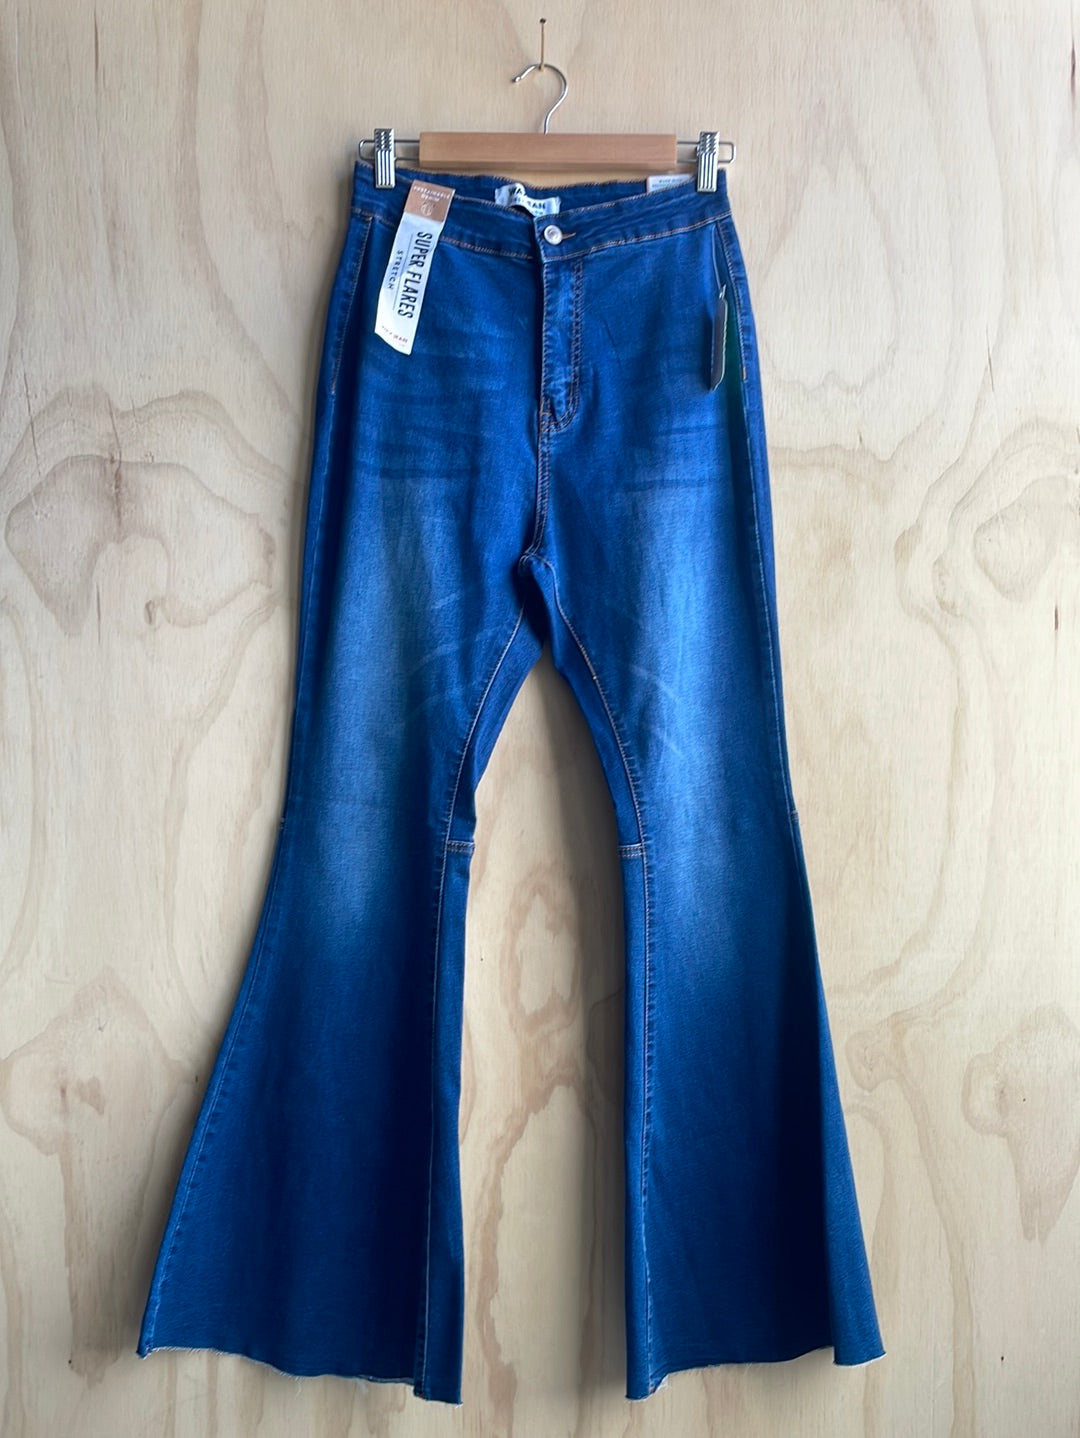 Wax Flare Jeans - 30